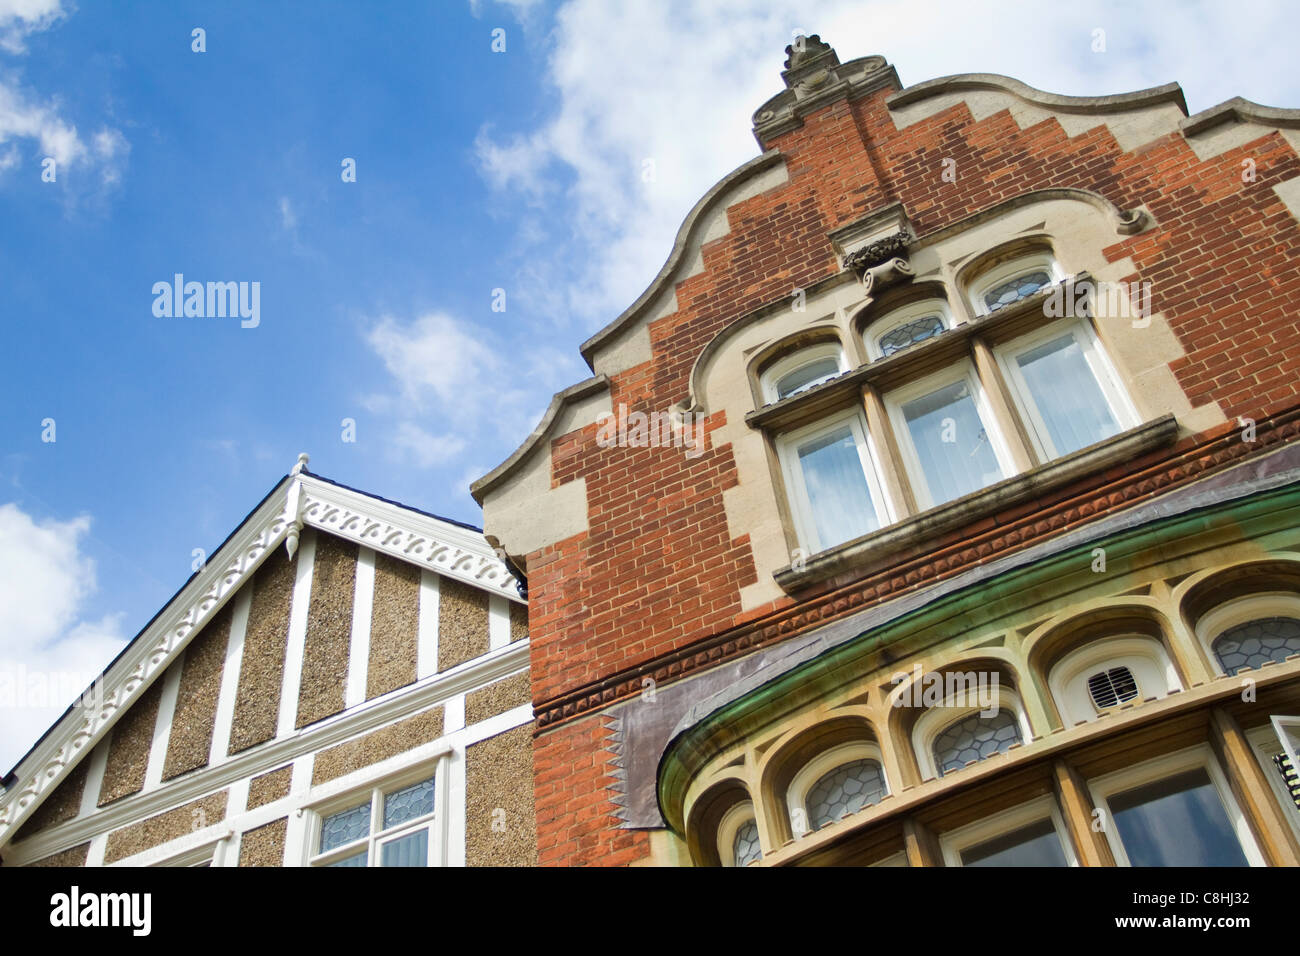 The facade of the hall in Bletchley Park, home of the British codebreakers of World War II, England Stock Photo